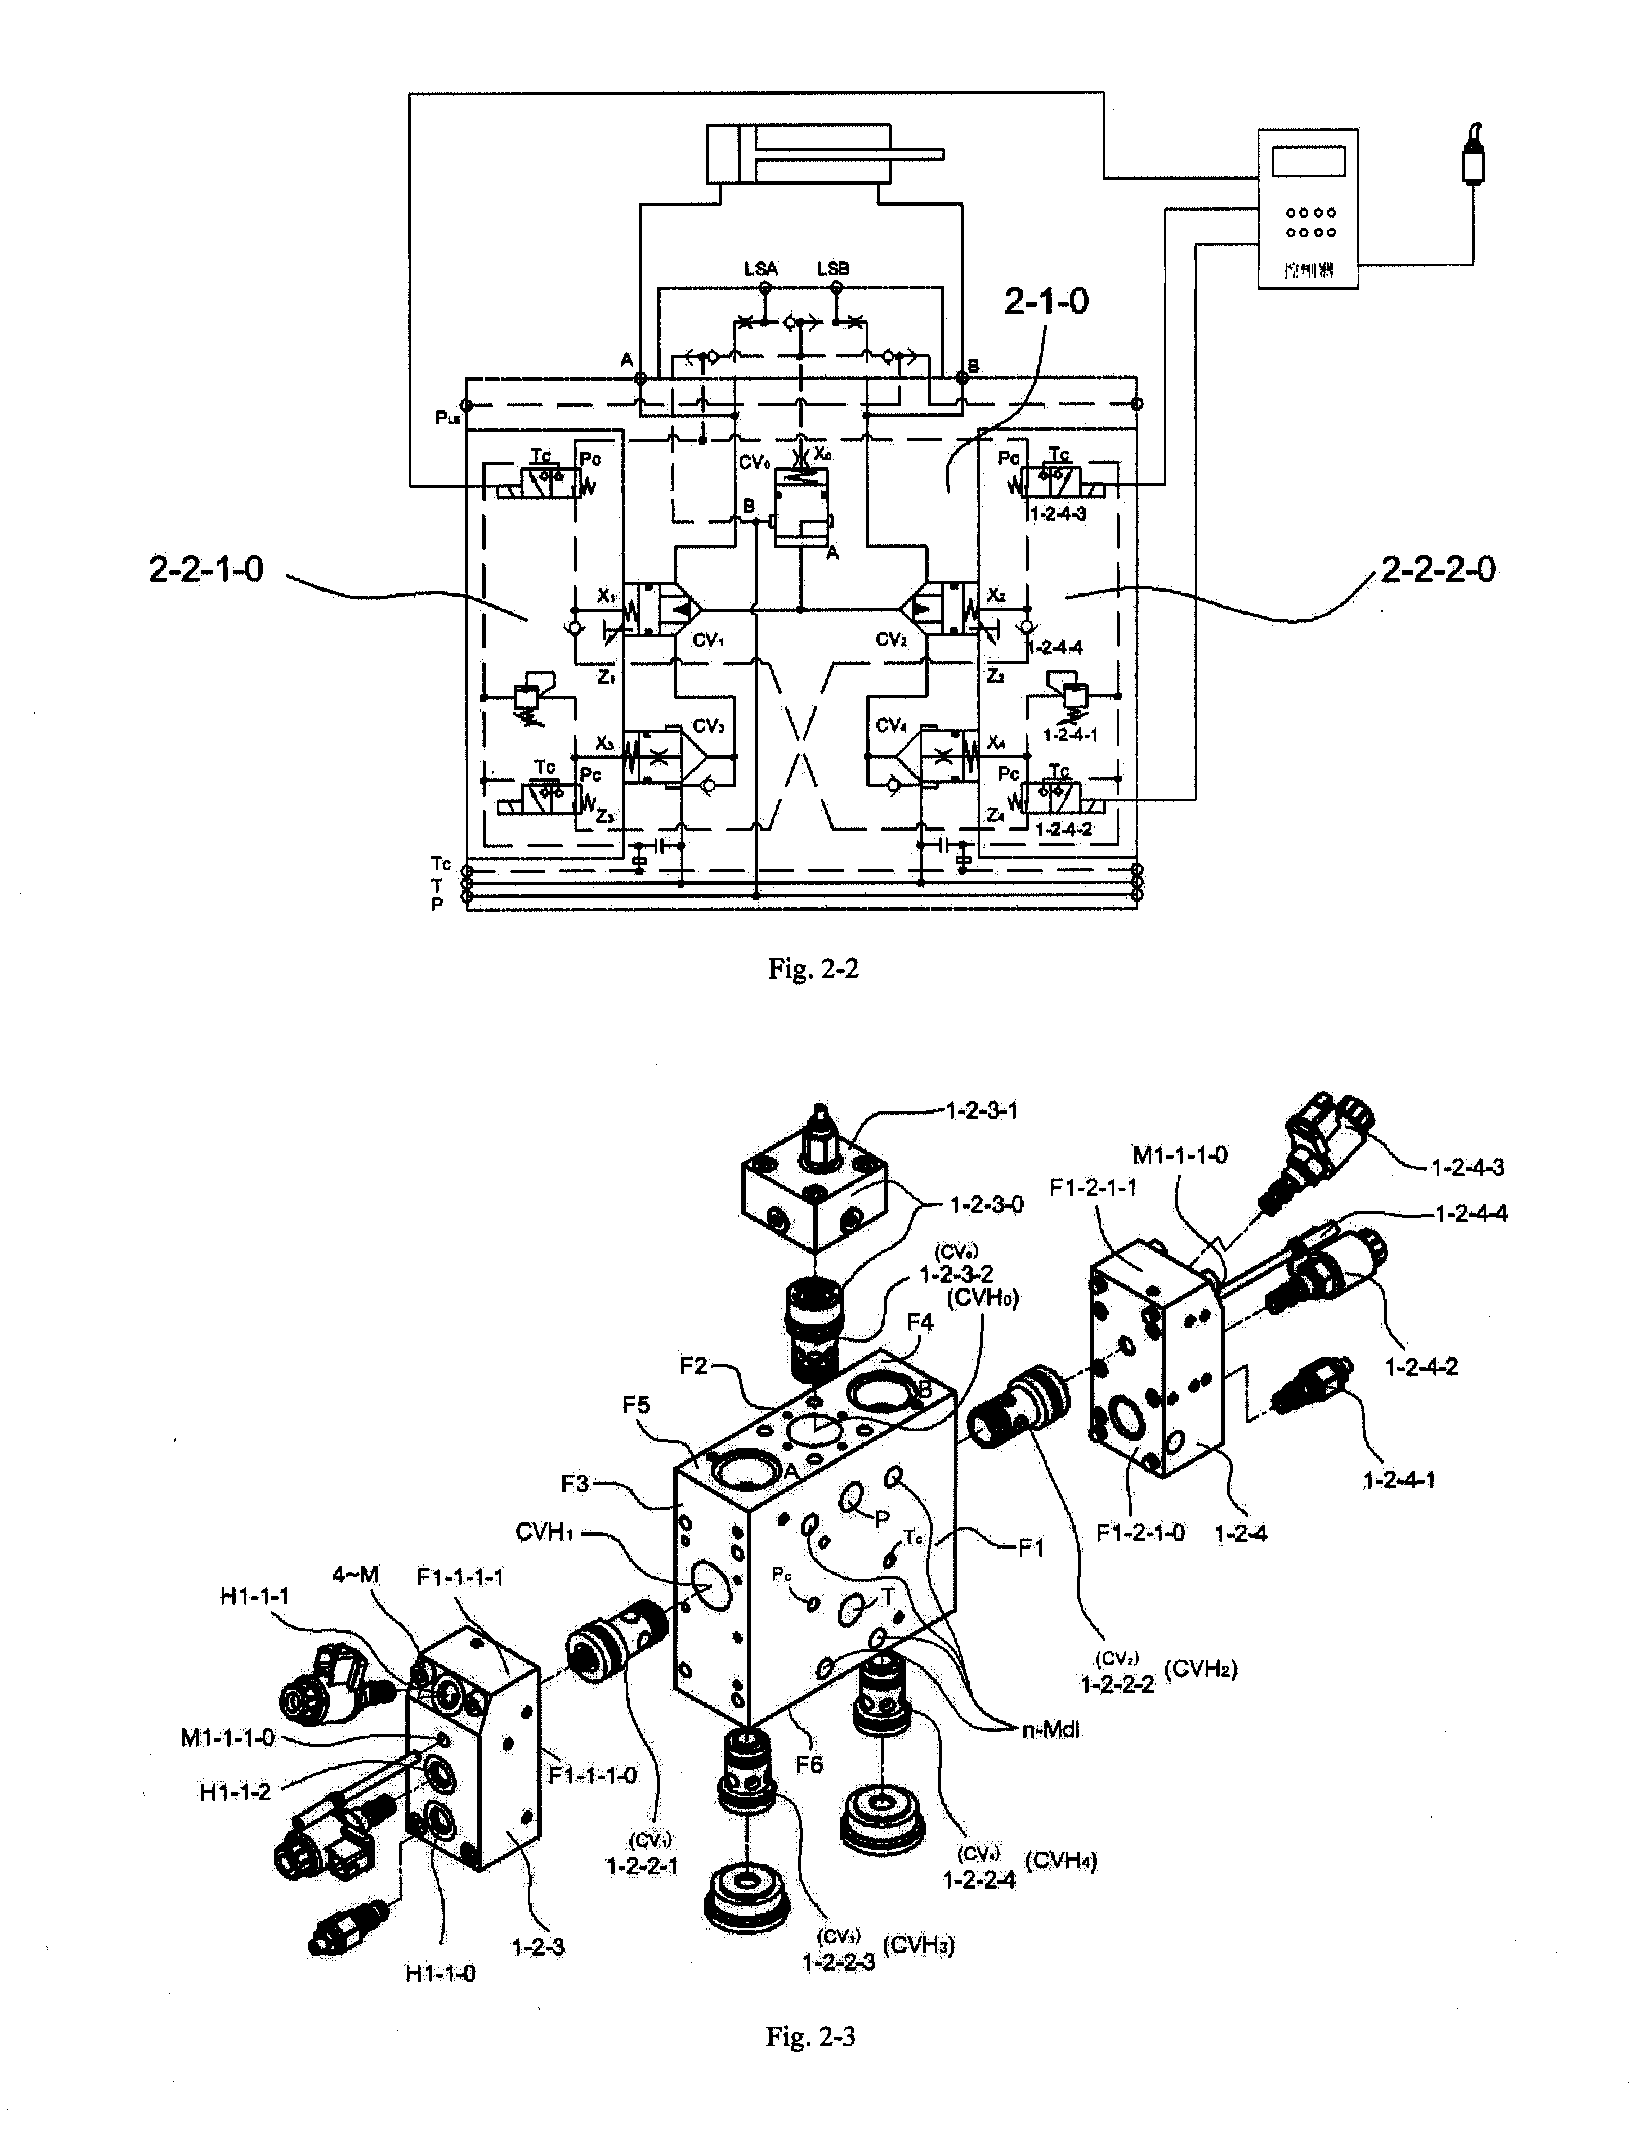 Modular combined electro-hydraulic multi-way valve system using compact two-way cartridge valves